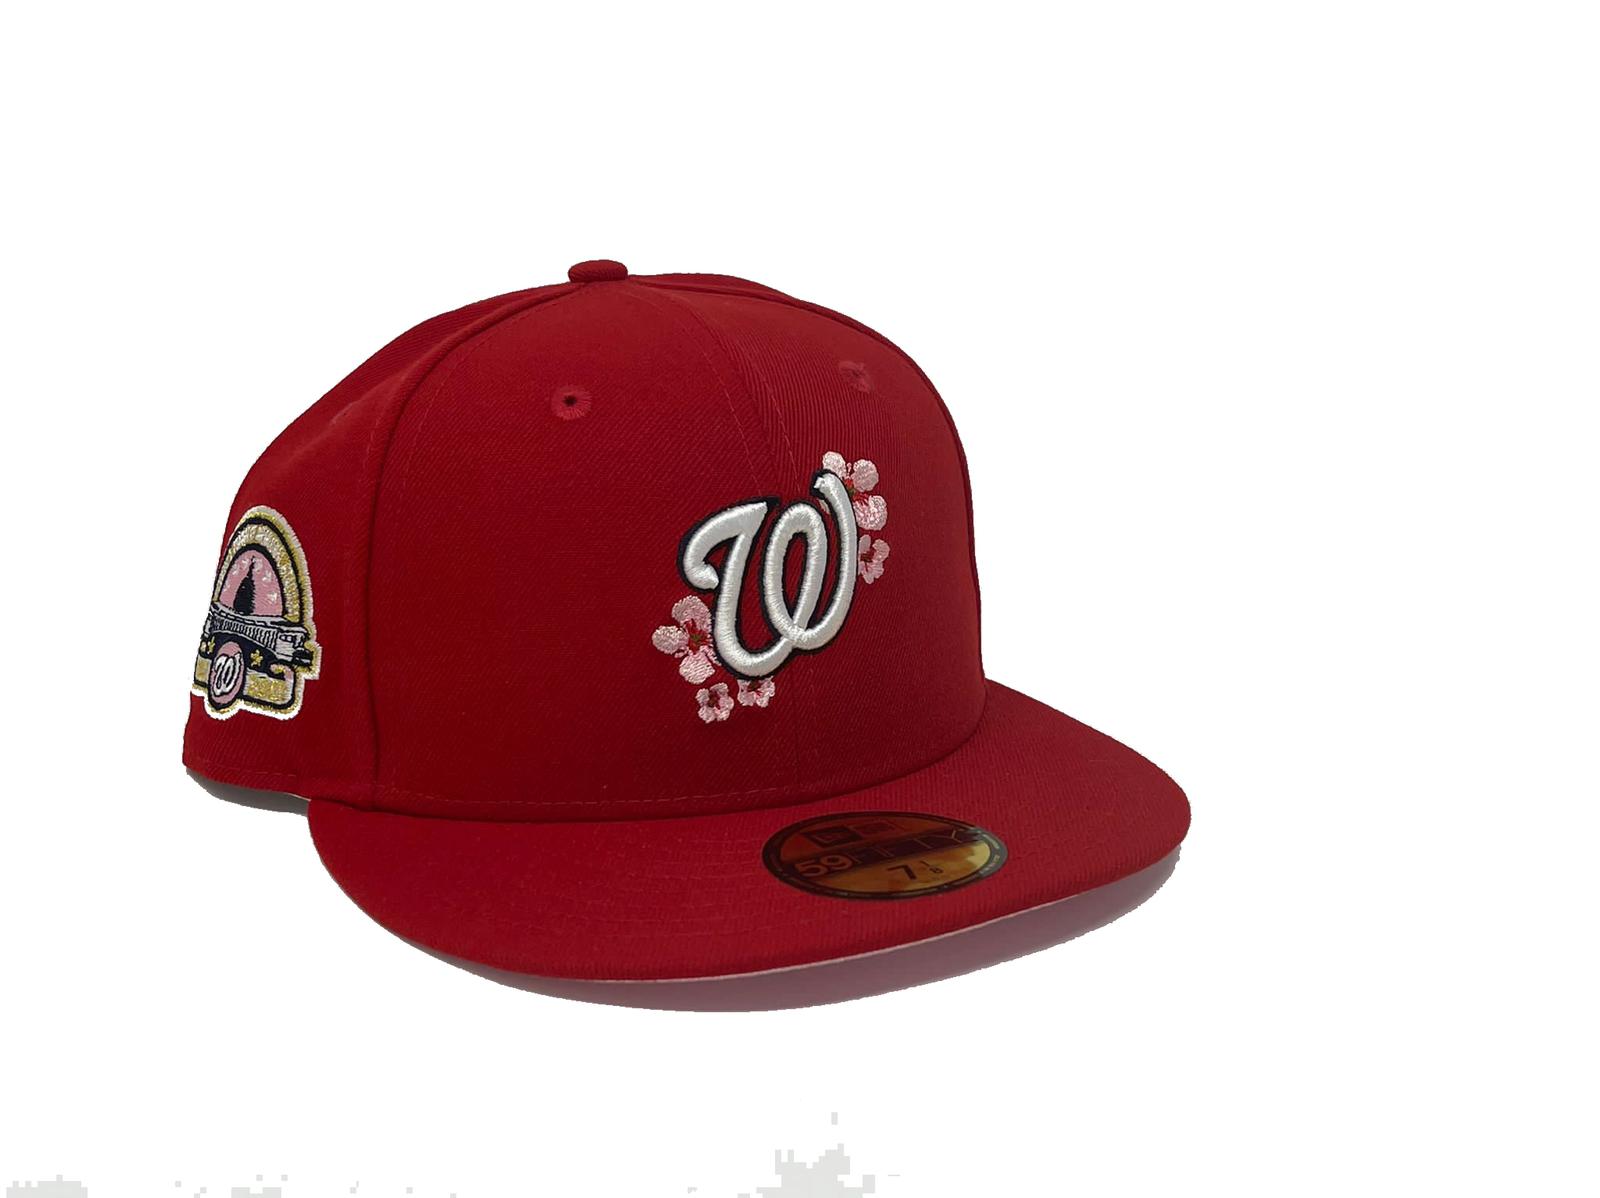 Lot - WASHINGTON NATIONALS CLOTHING INCLUDING A JERSEY AND A HAT